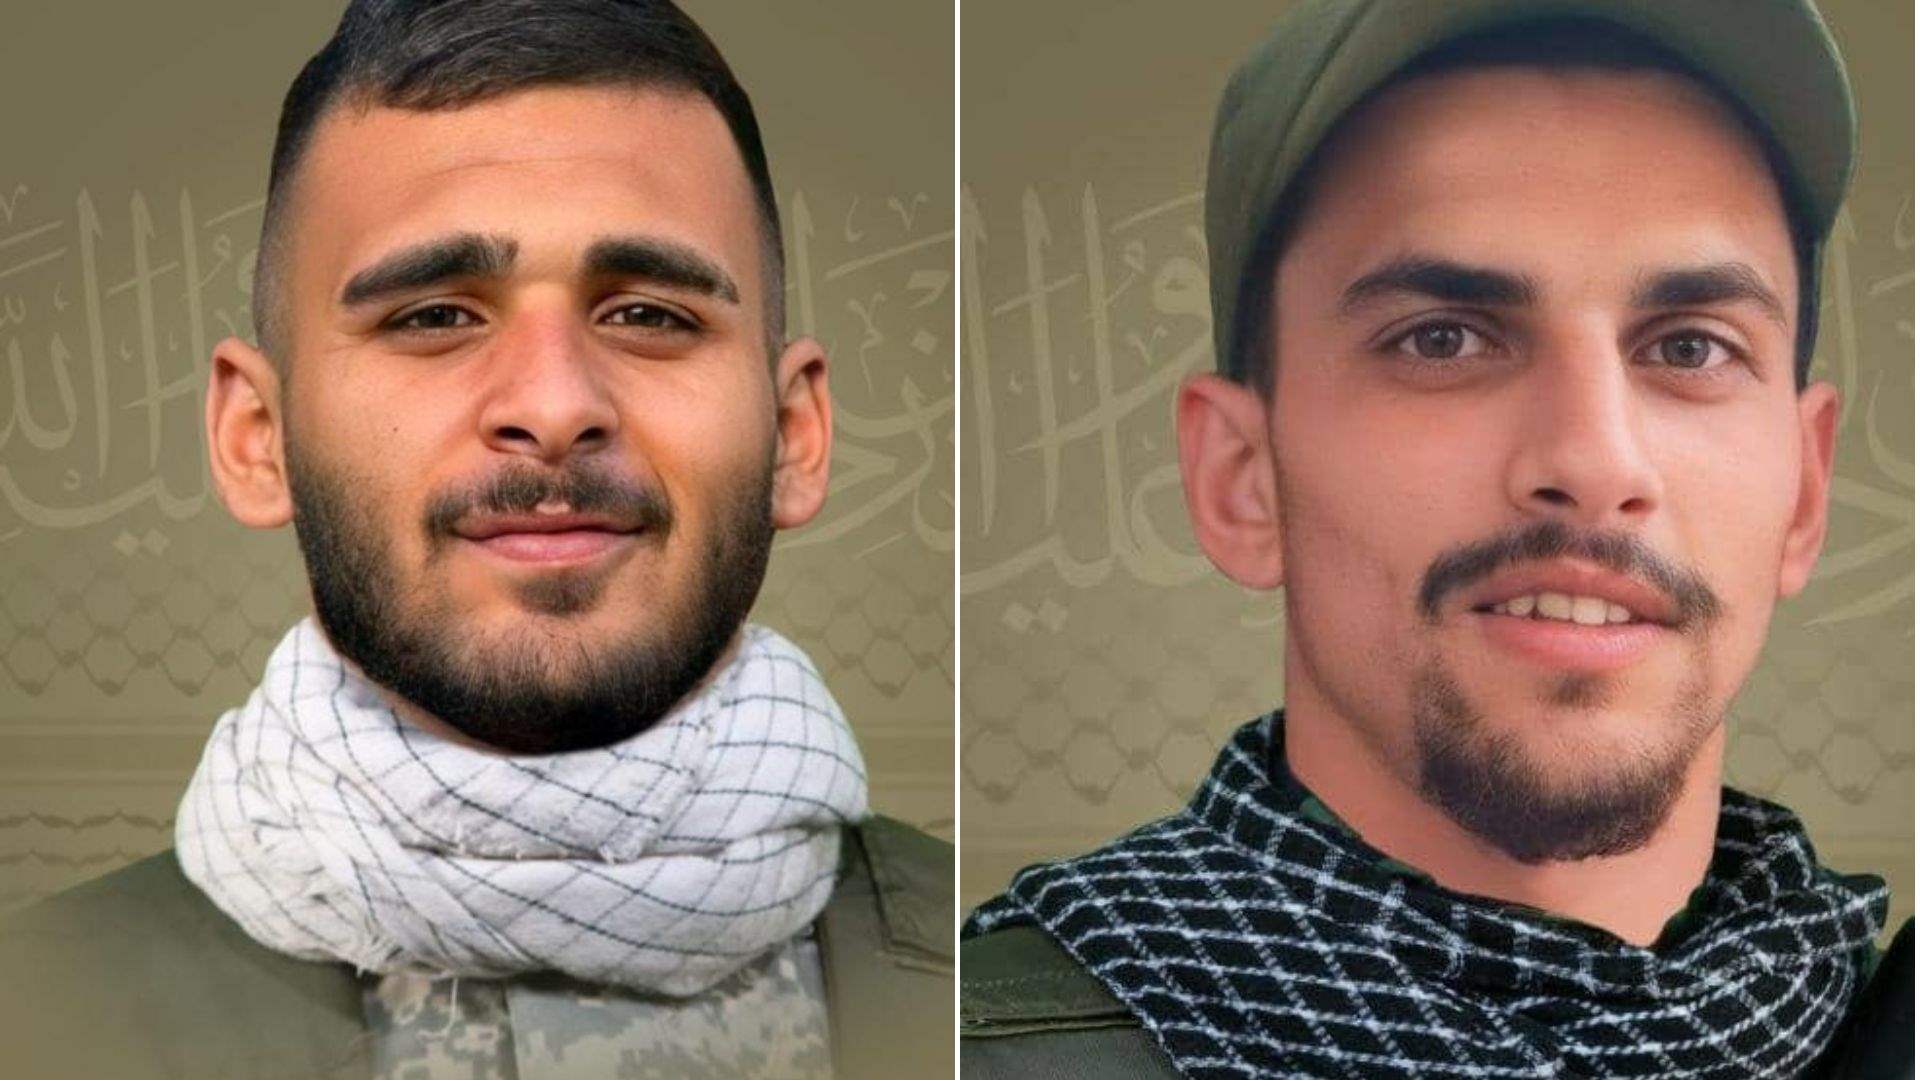 Hezbollah mourns two martyrs from southern Lebanon